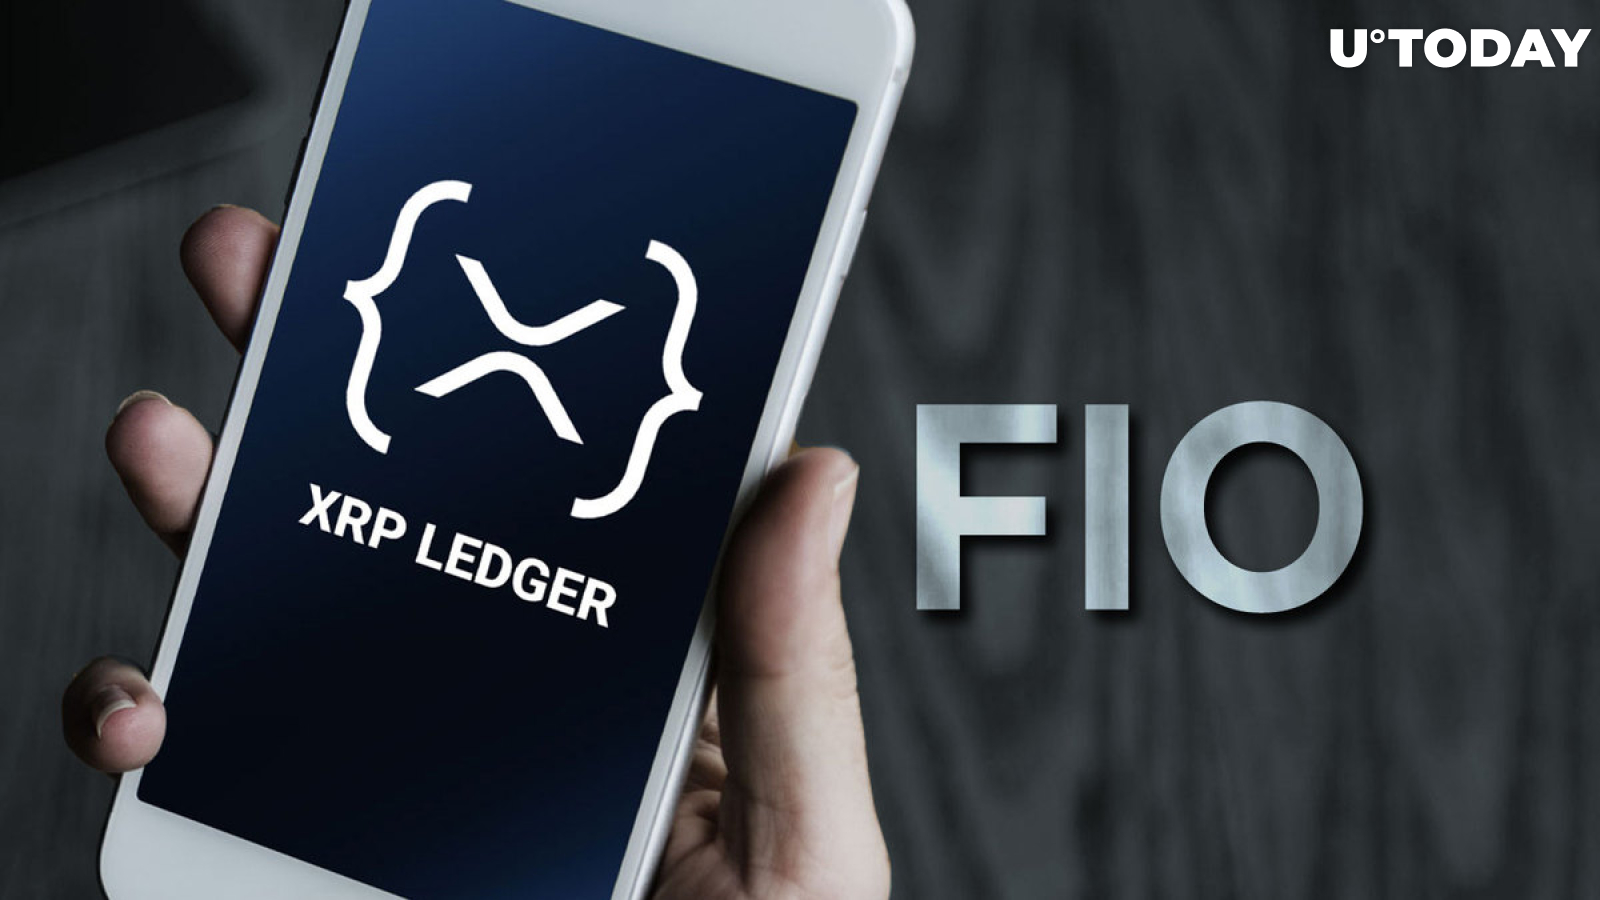 XRP Ledger Now Supports FIO Send: What Does This Mean?